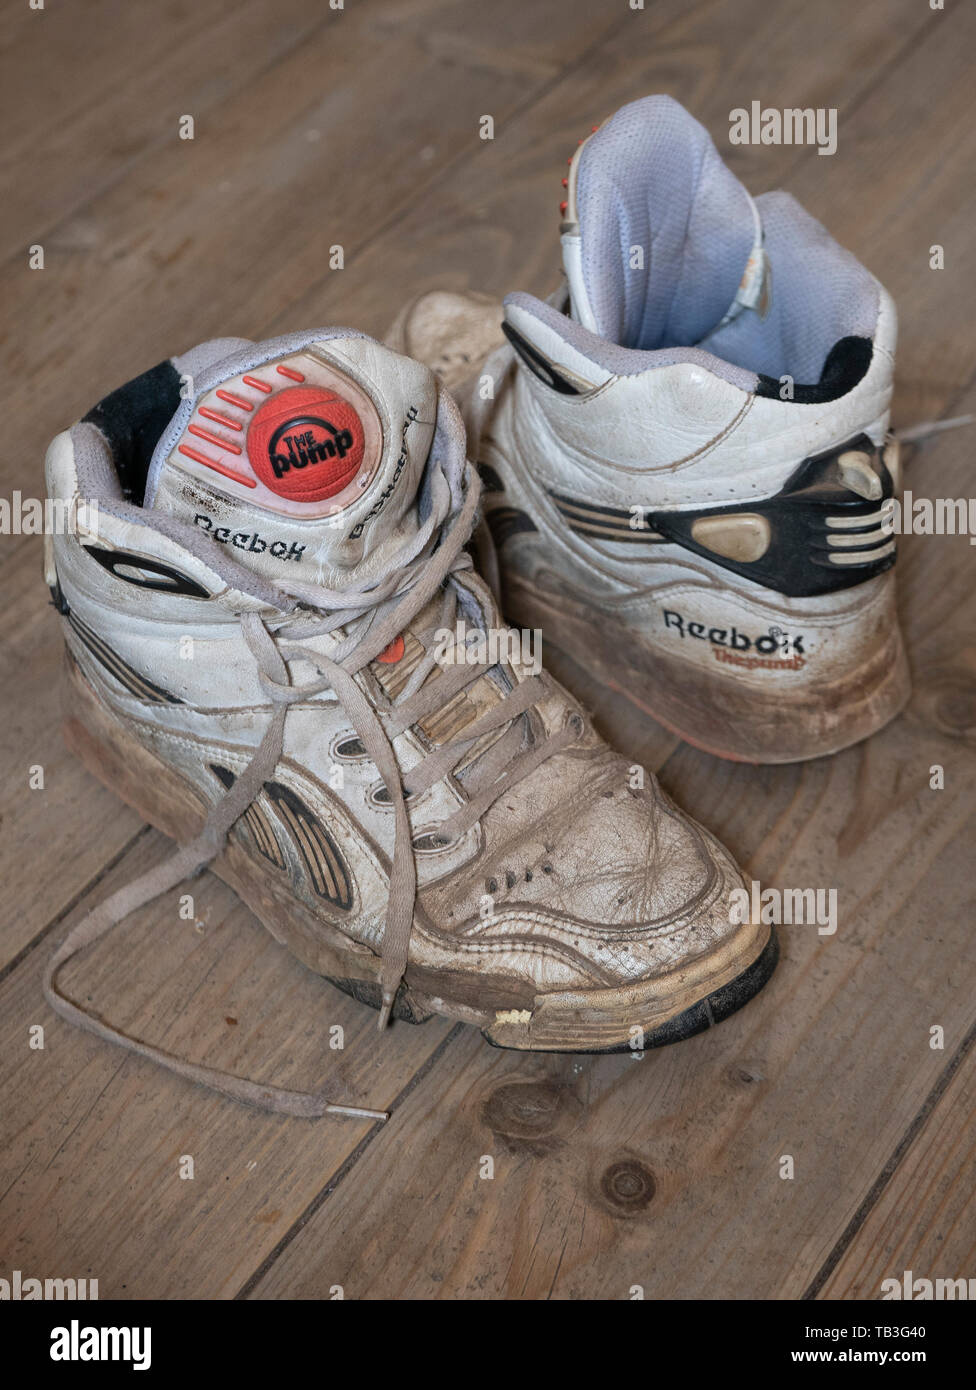 Pair of old 1990s Pump white basketball sneakers Stock Photo Alamy